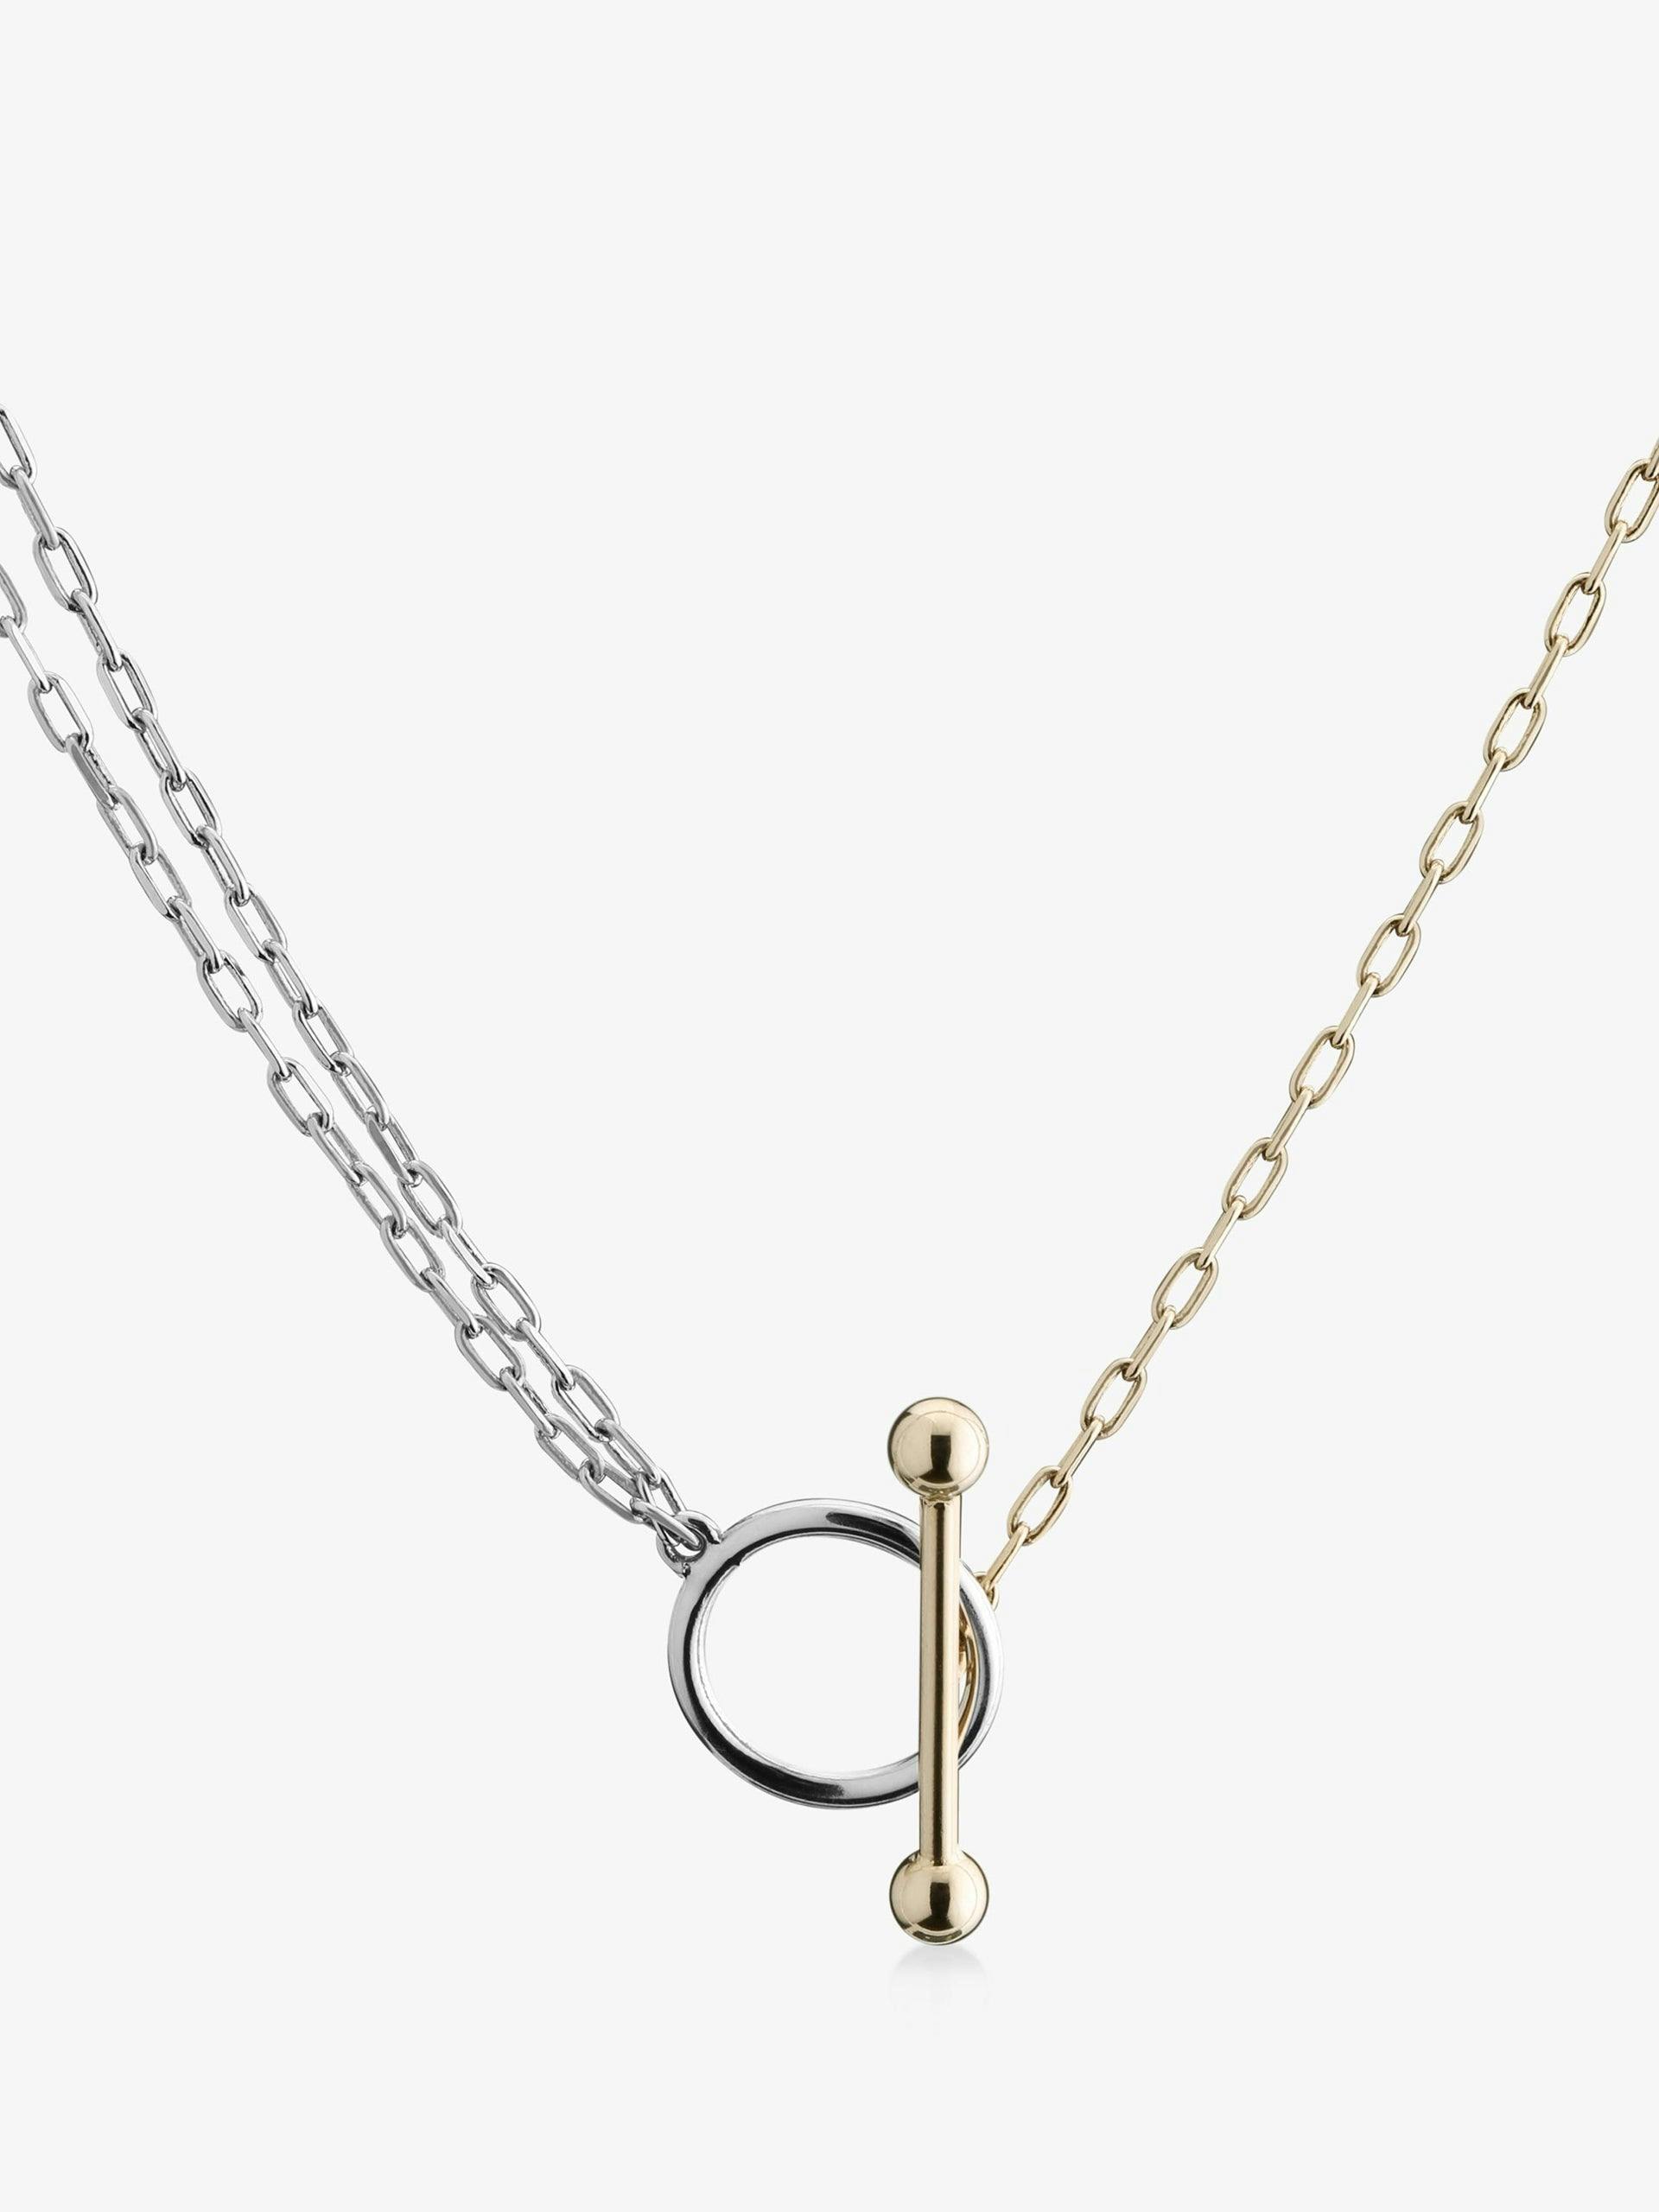 Gold and silver T-bar dual chain necklace